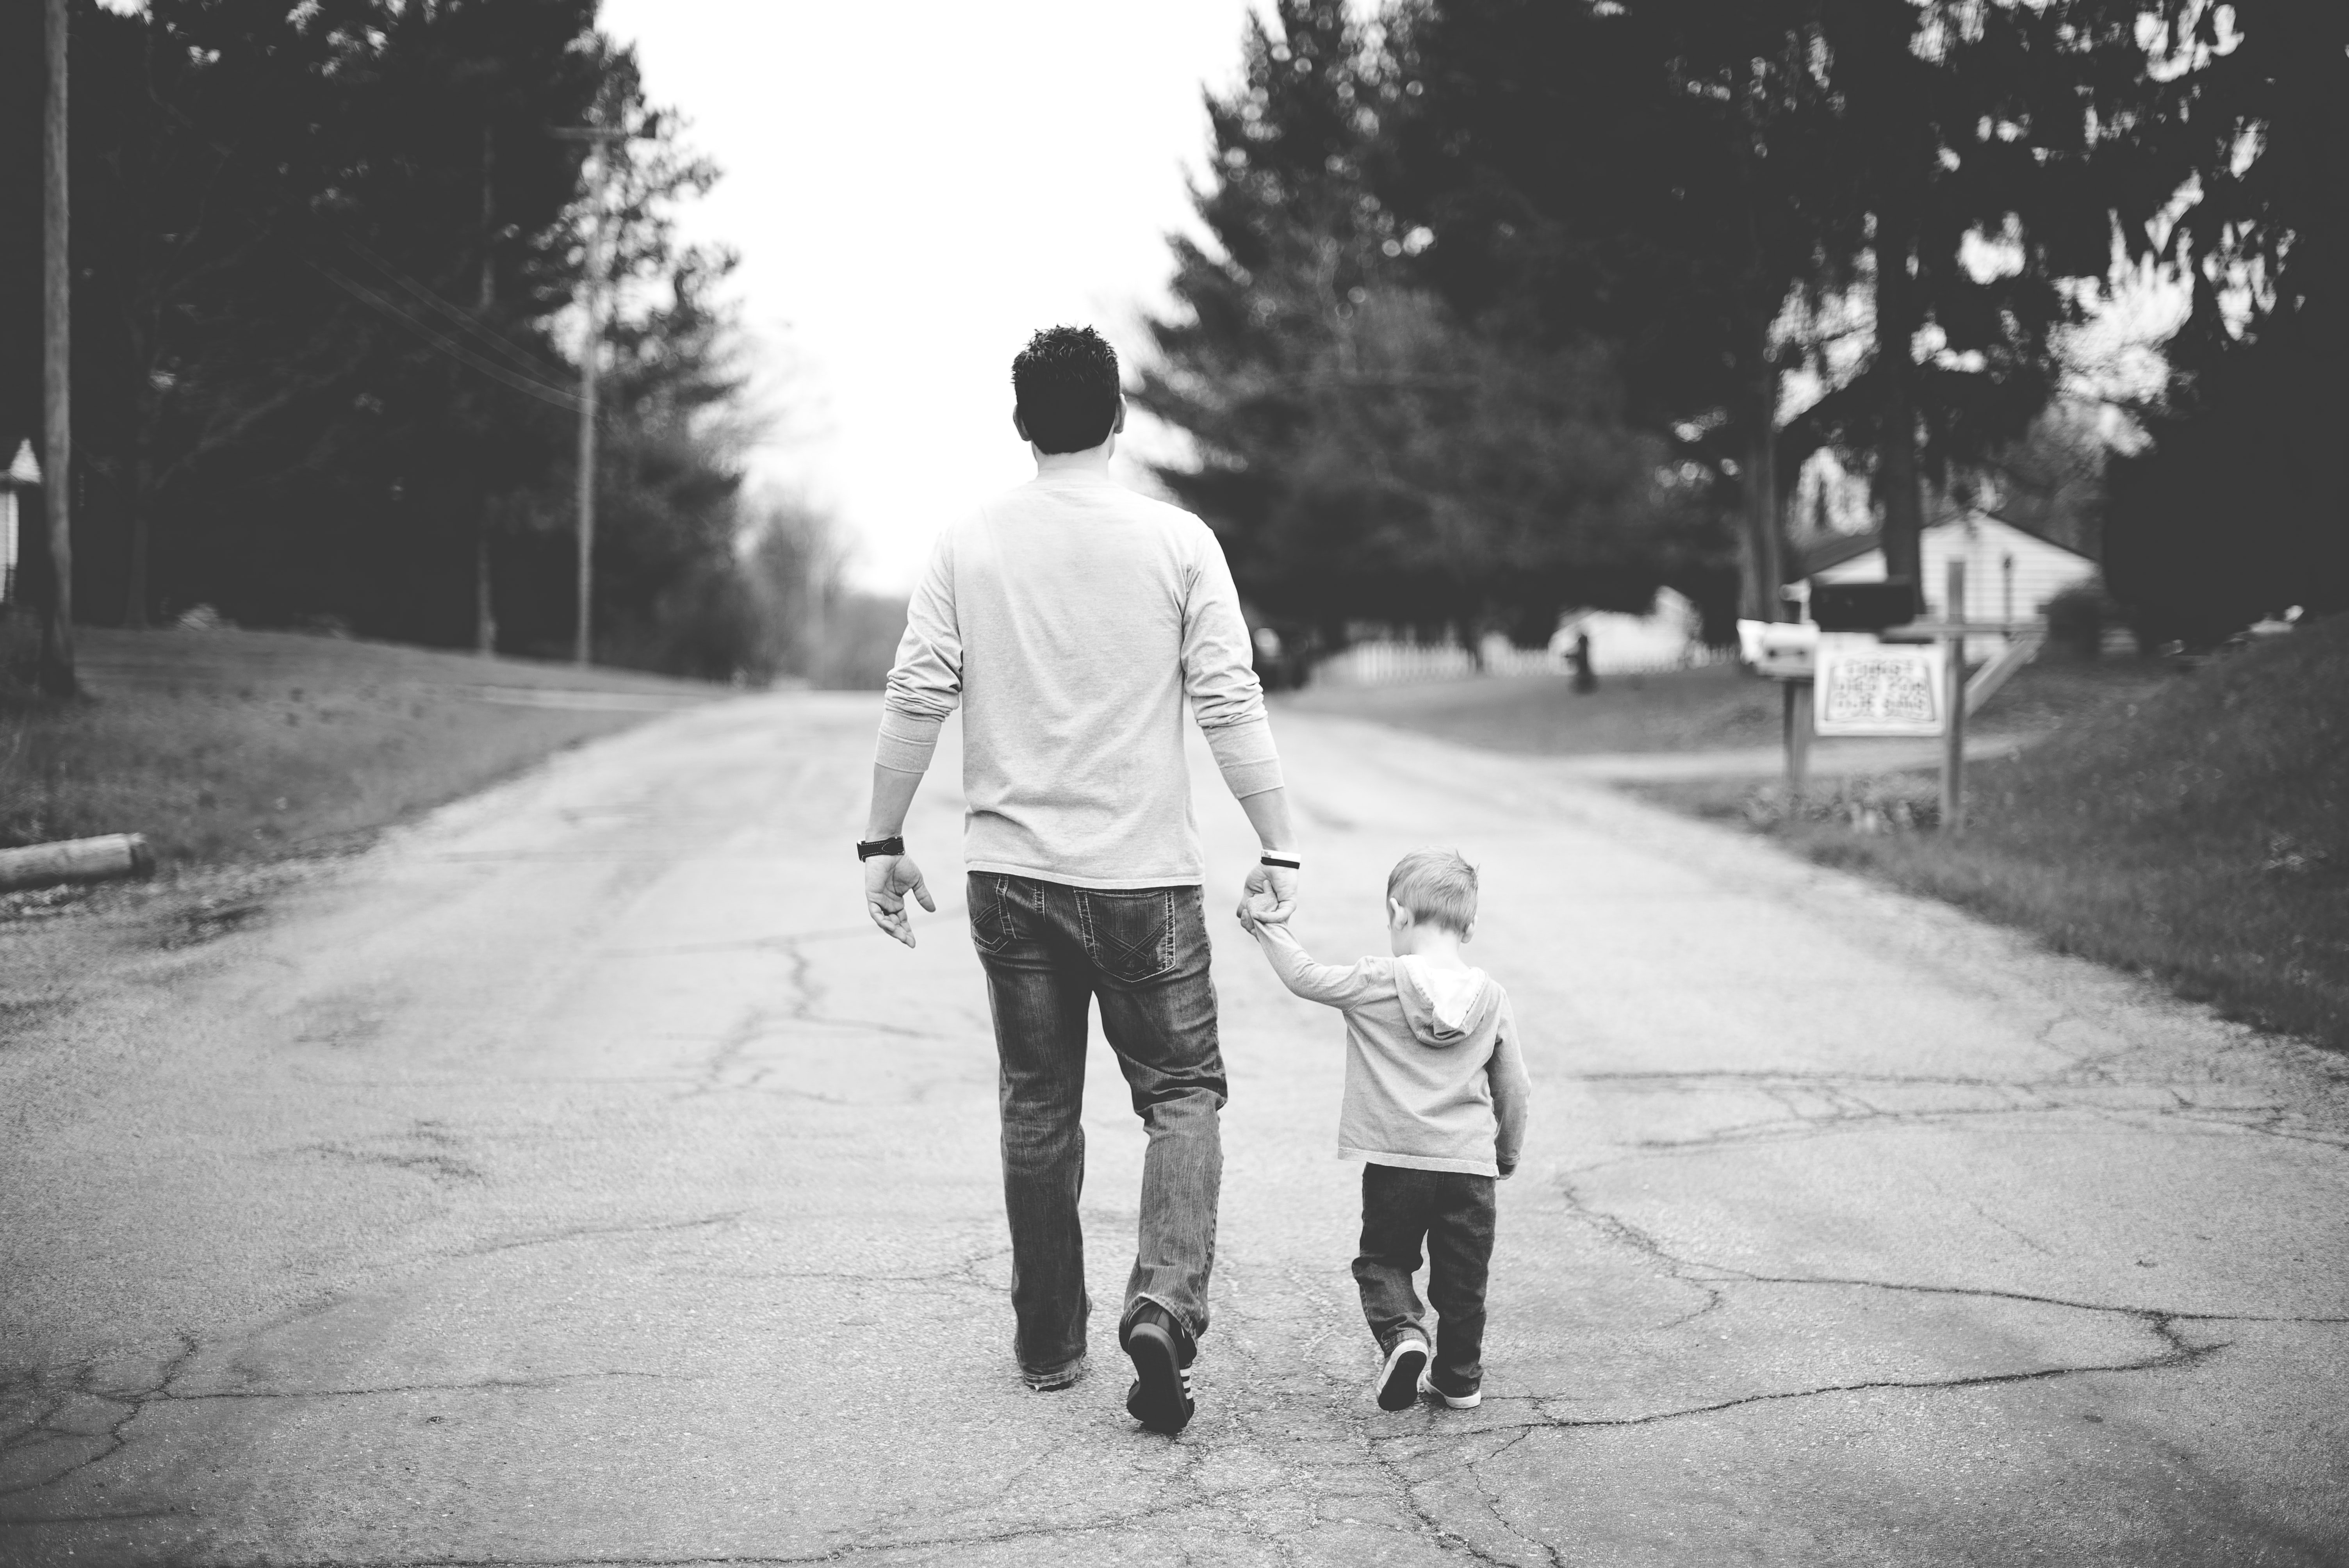 OP relocated with his wife & son to a new place. | Source: Unsplash